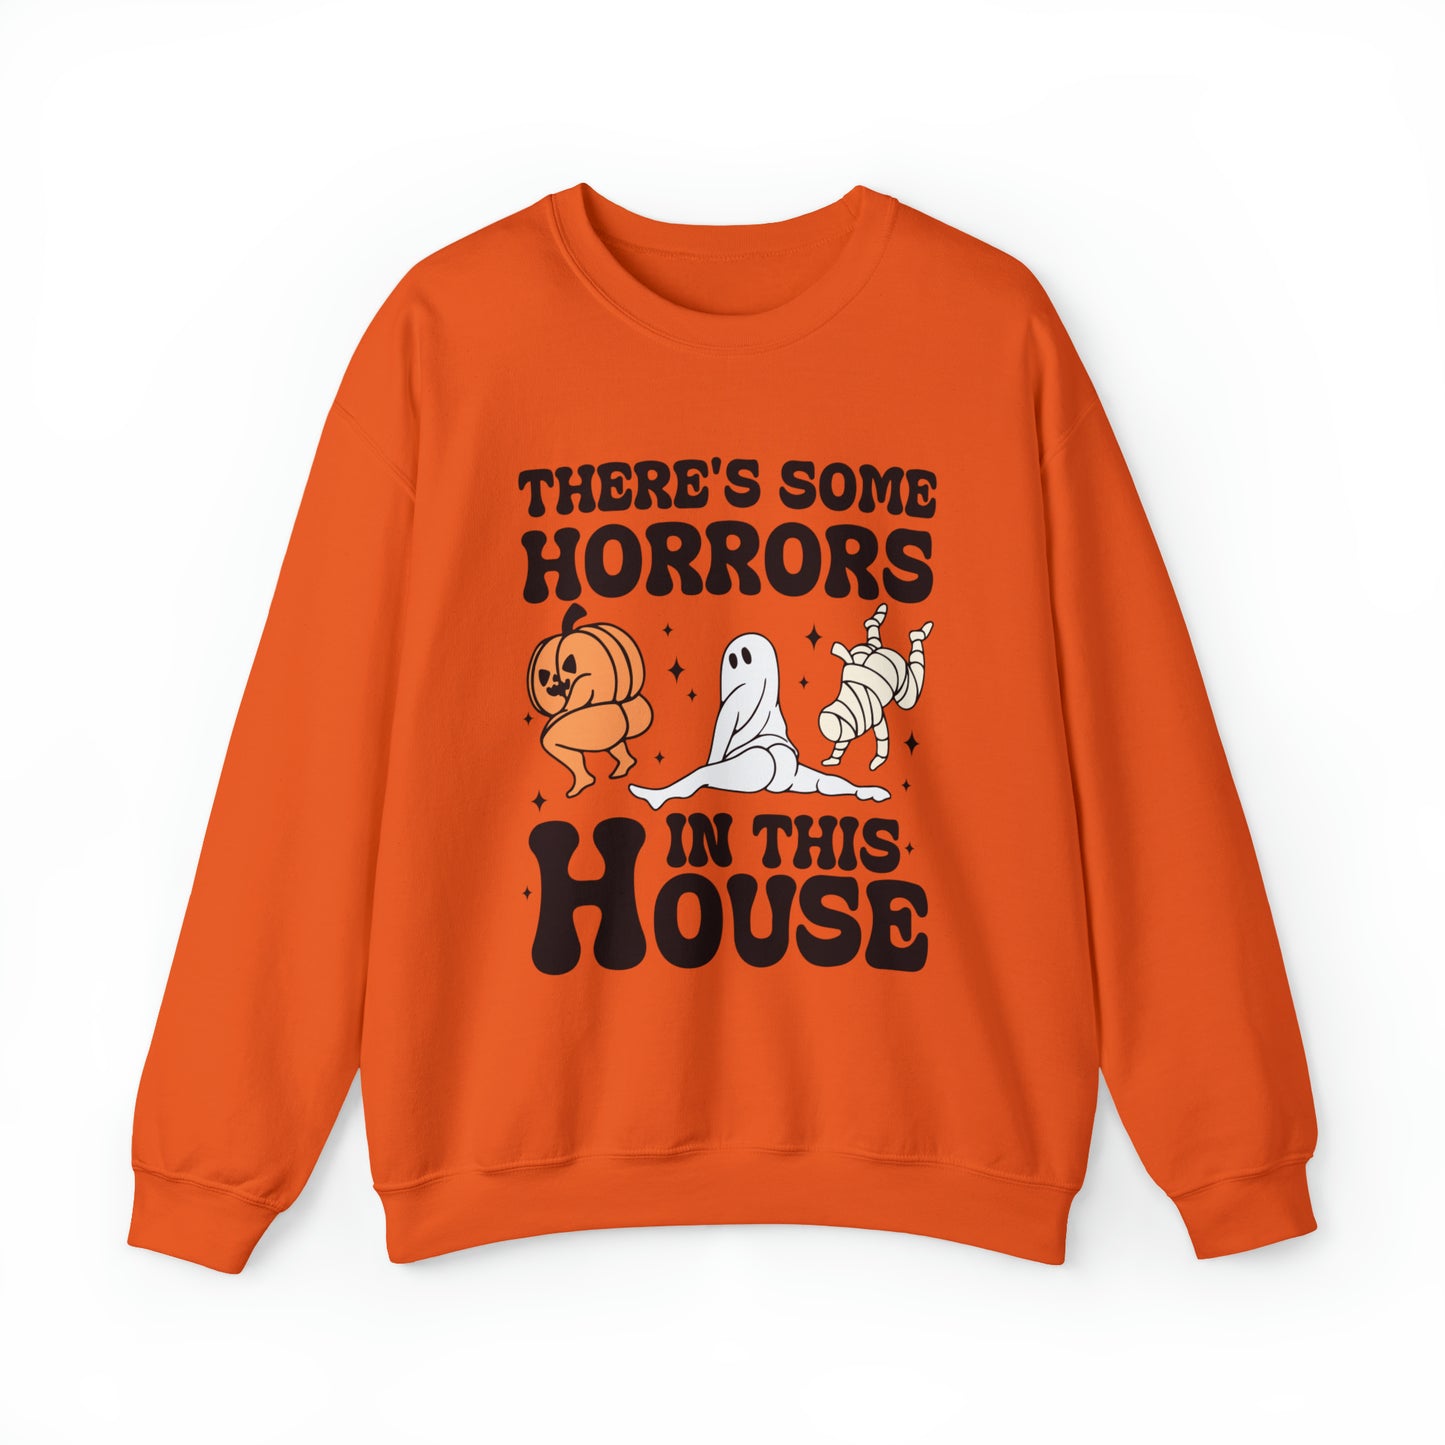 There's Some Horrors In This House Sweatshirt